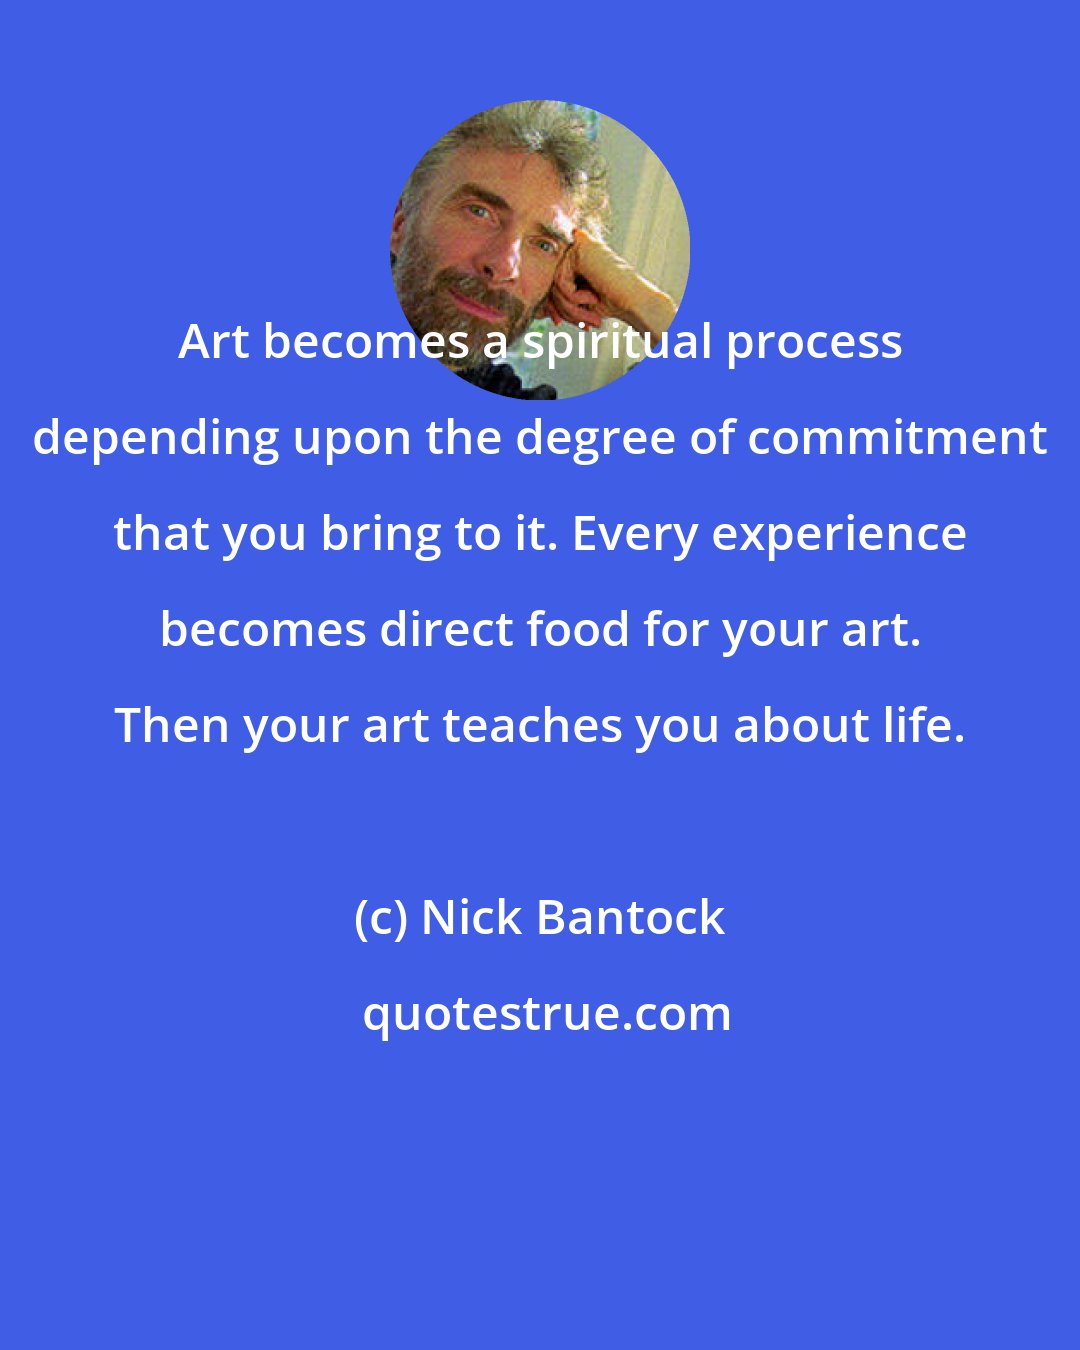 Nick Bantock: Art becomes a spiritual process depending upon the degree of commitment that you bring to it. Every experience becomes direct food for your art. Then your art teaches you about life.